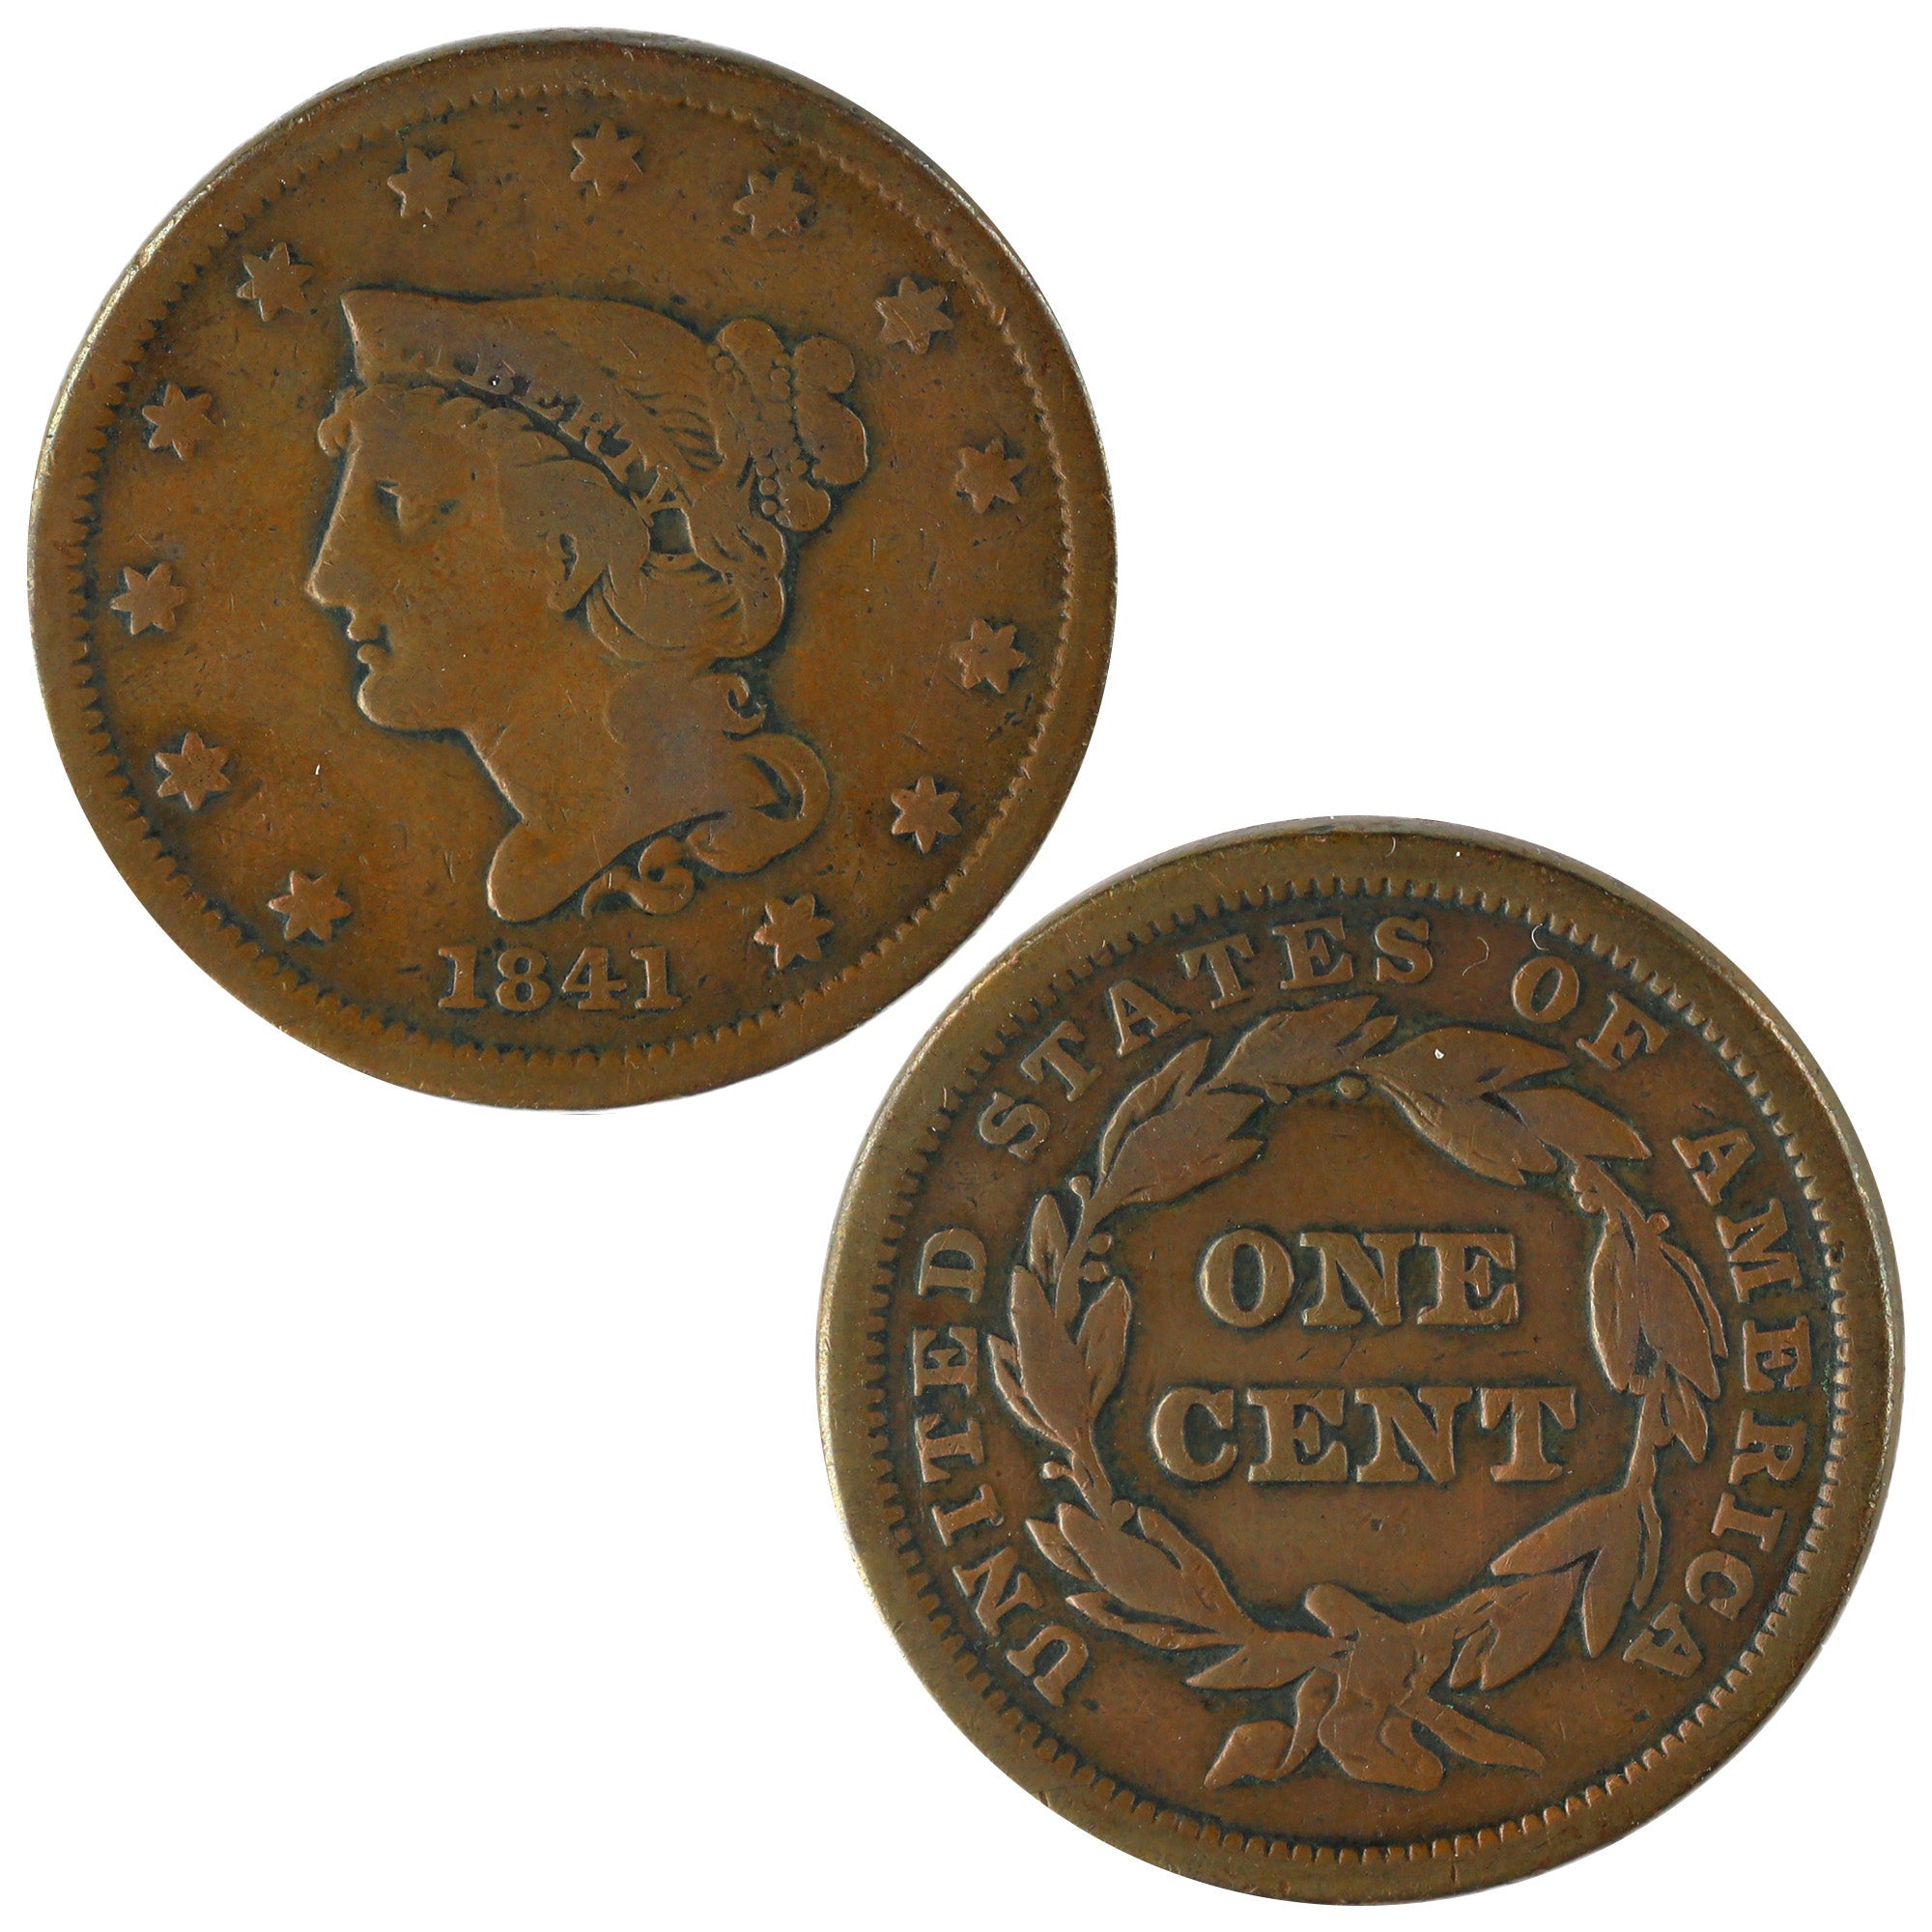 1841 Braided Hair Large Cent VG Very Good Copper Penny 1c SKU:I11992